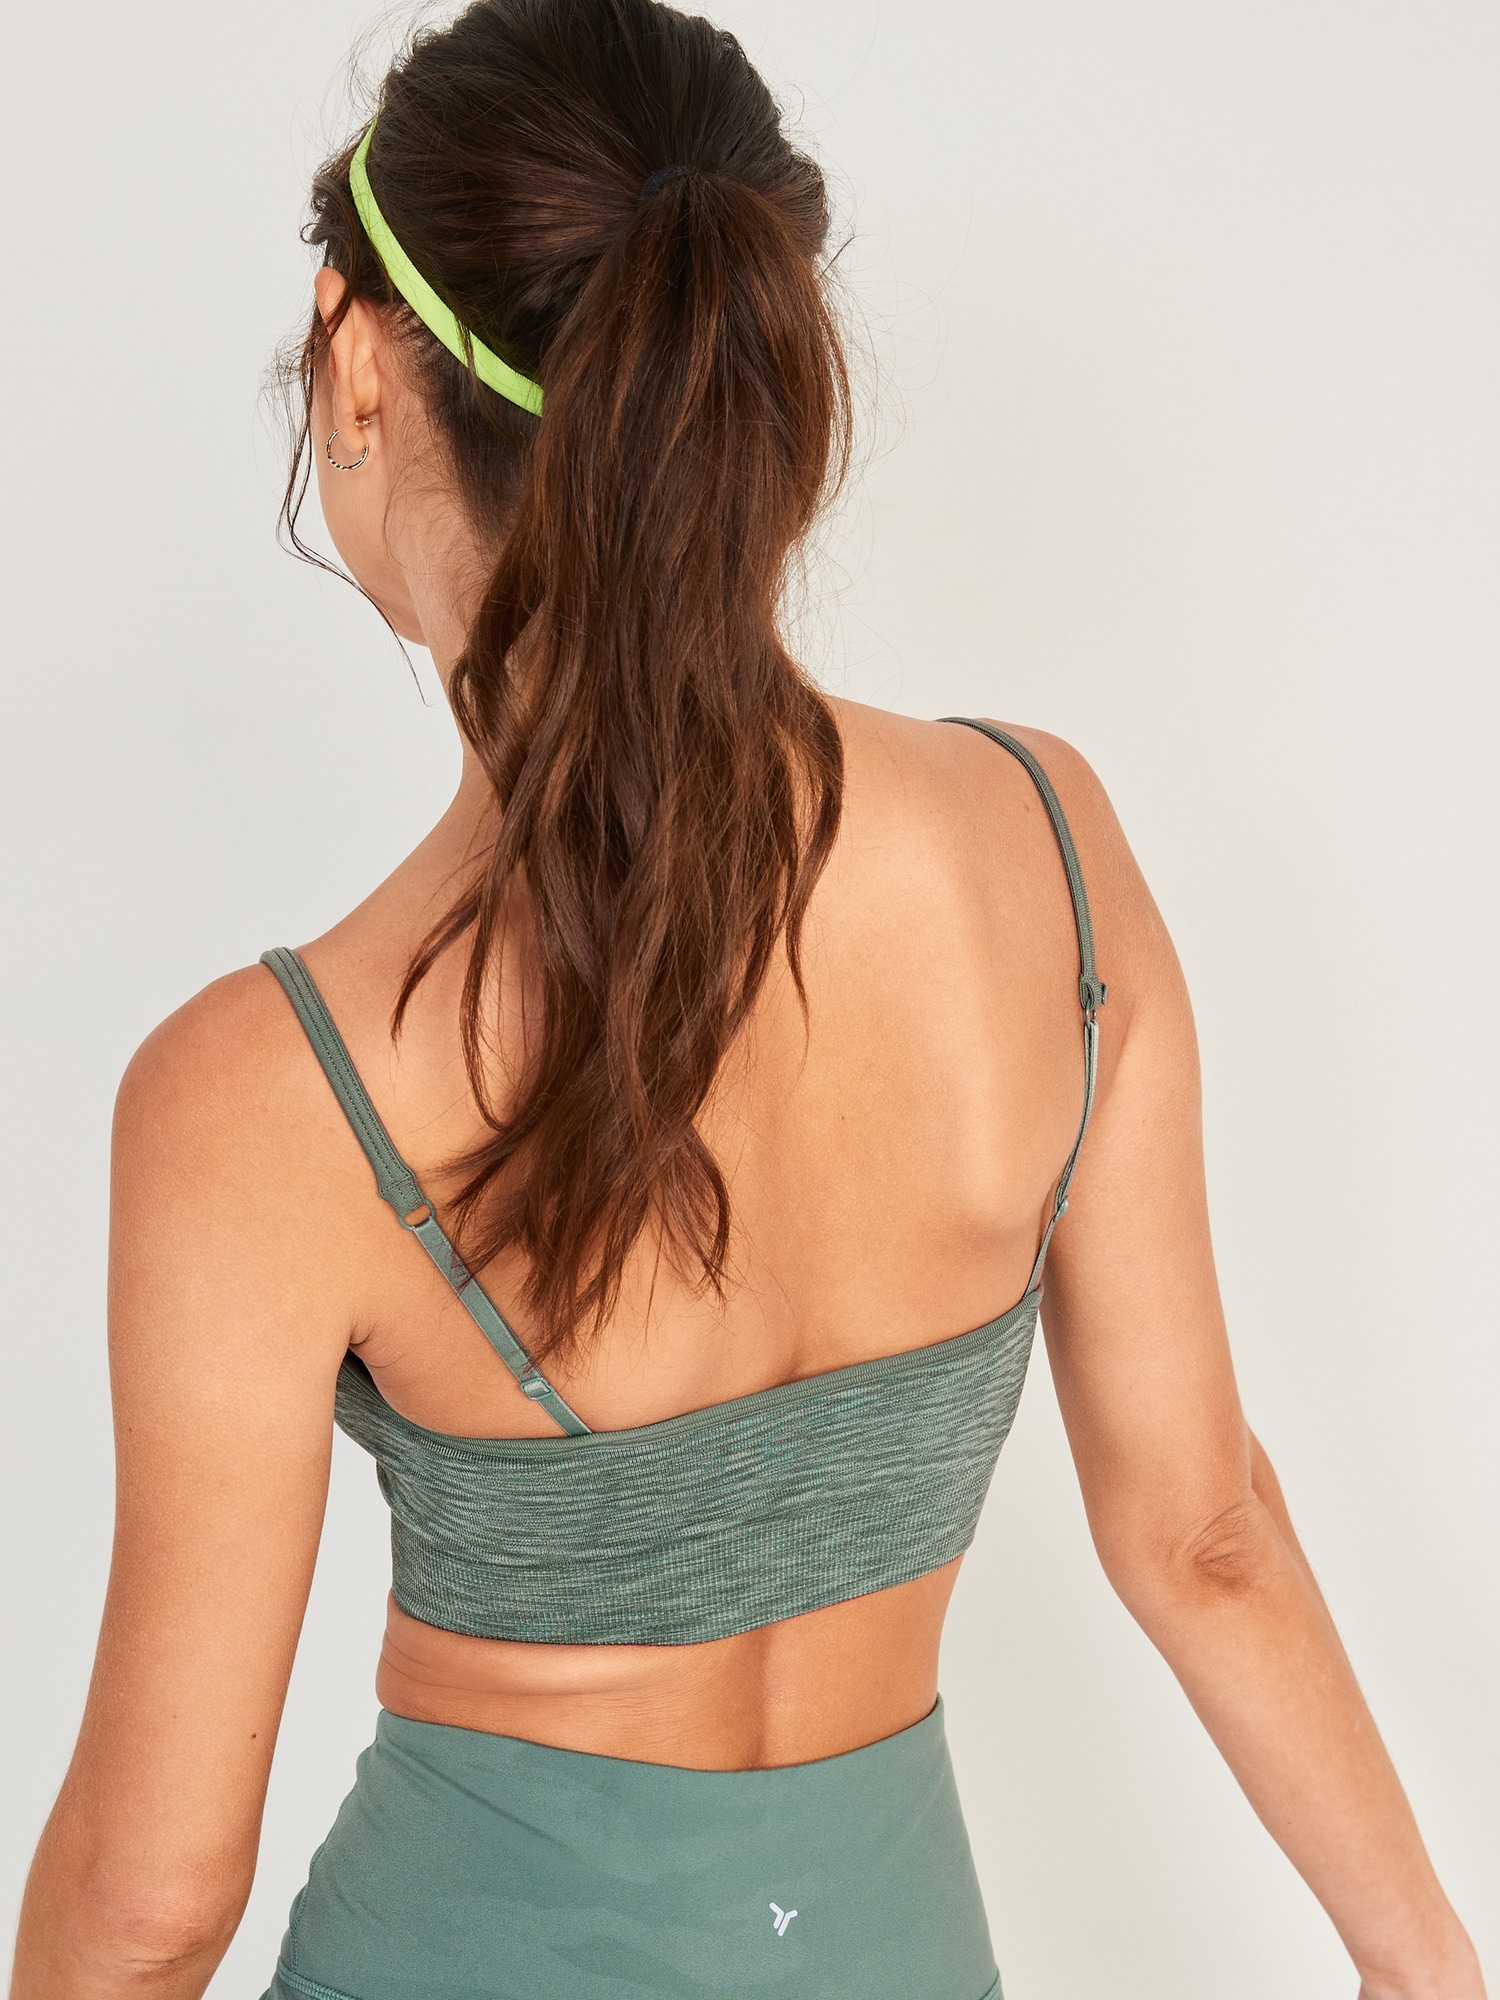 Old Navy Light Support Seamless Convertible Racerback Sports Bra for Women  XS-4X